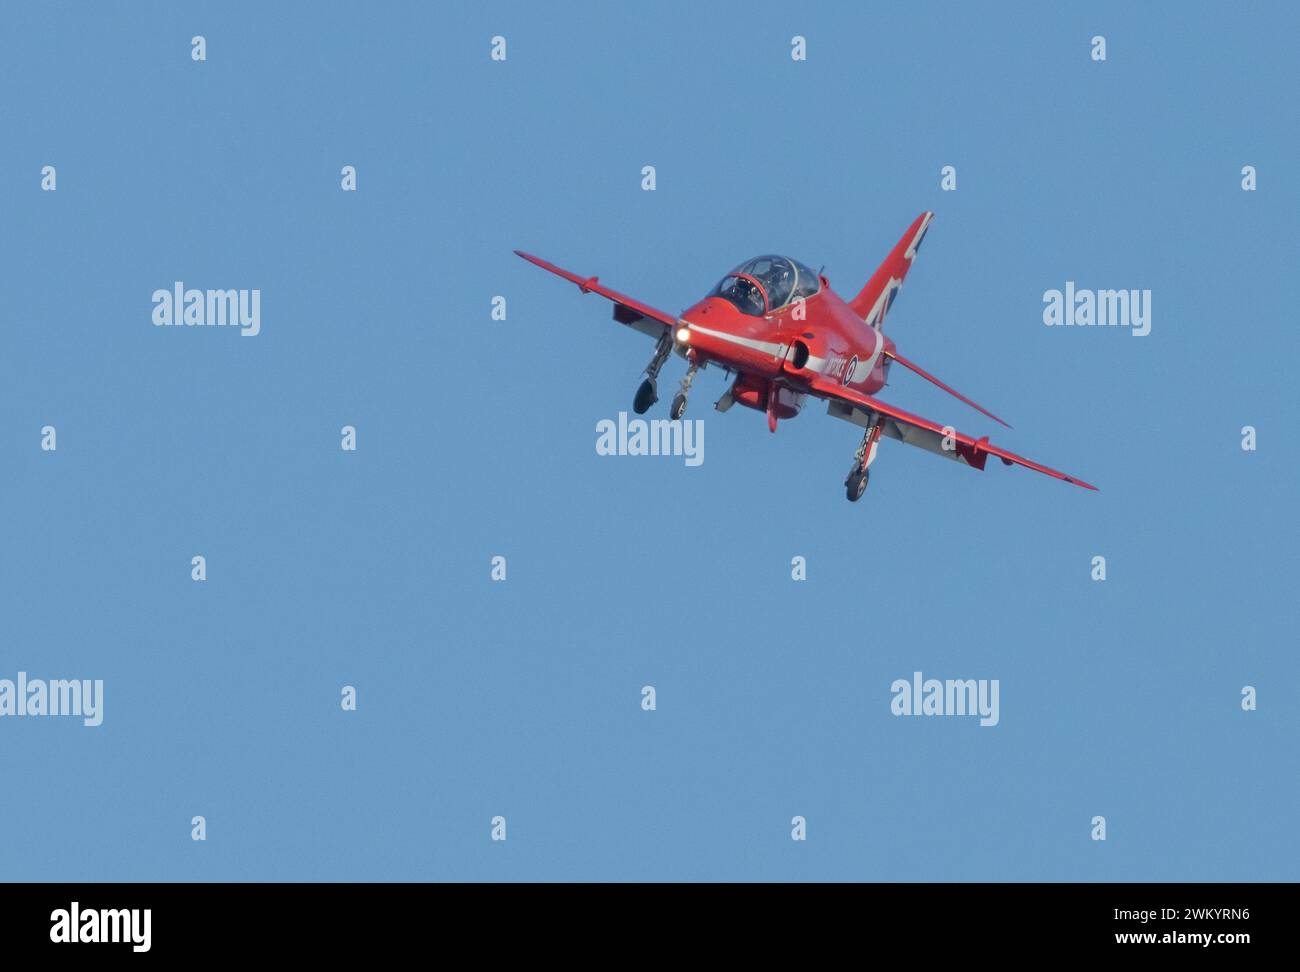 Royal airforce military hawk red arrow jets Stock Photo